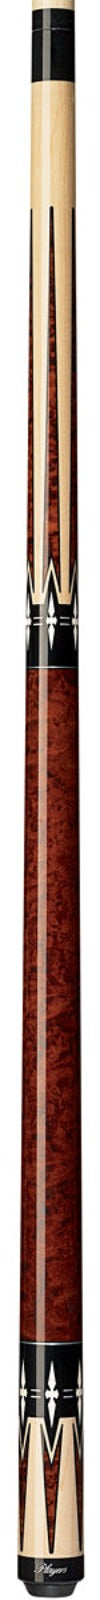 Players G-2290 Pool Cue -Players